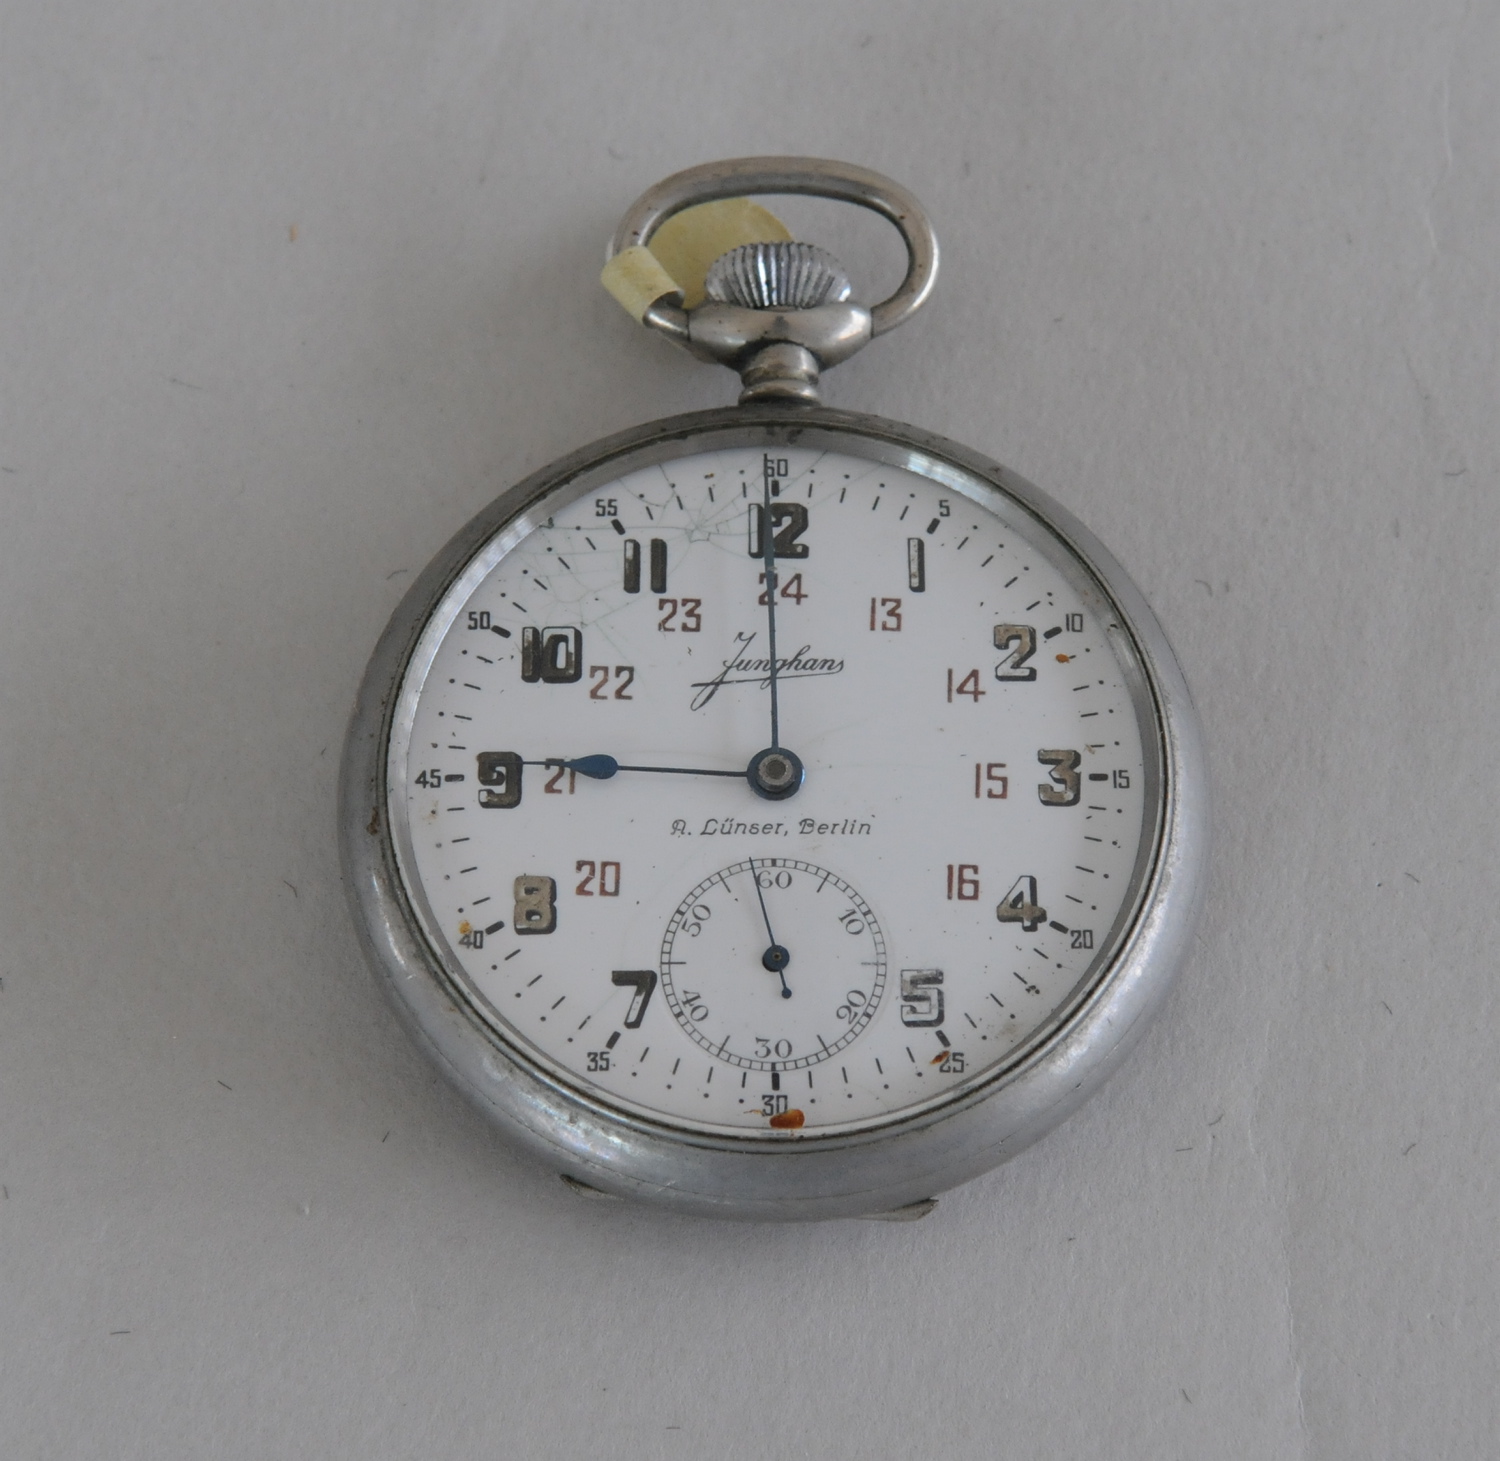 Unusual lever watch by Junghaus, for Lunser, Berlin, in nickel openface case, 1910.